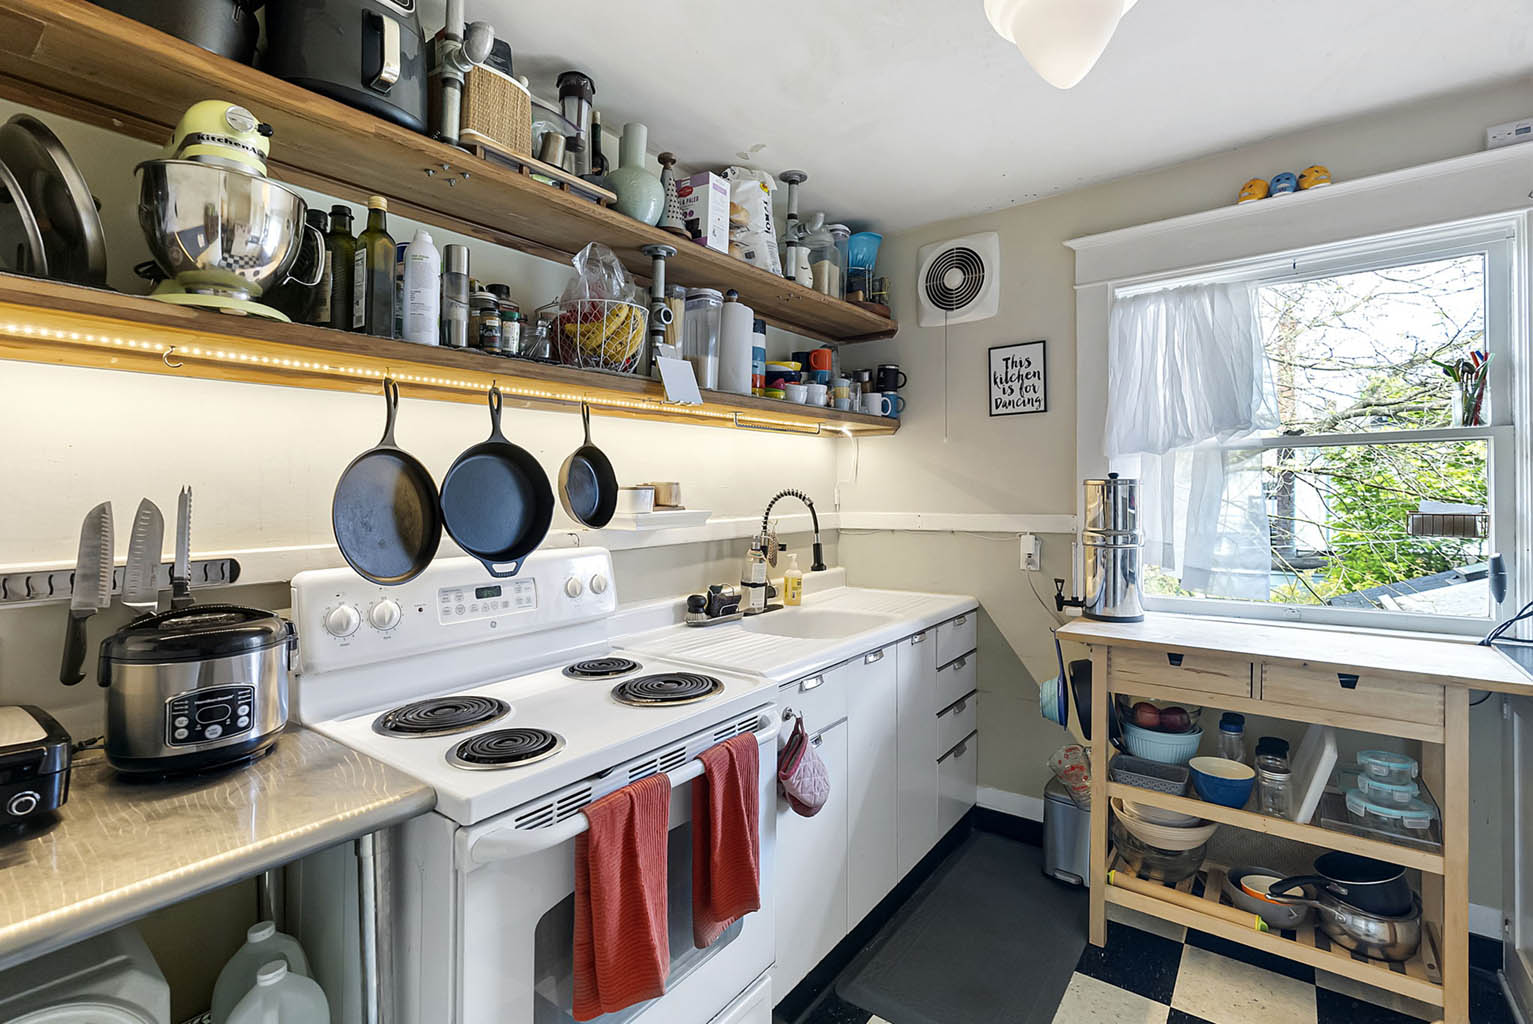 Kitchen with built-in shelving and vintage tile floor